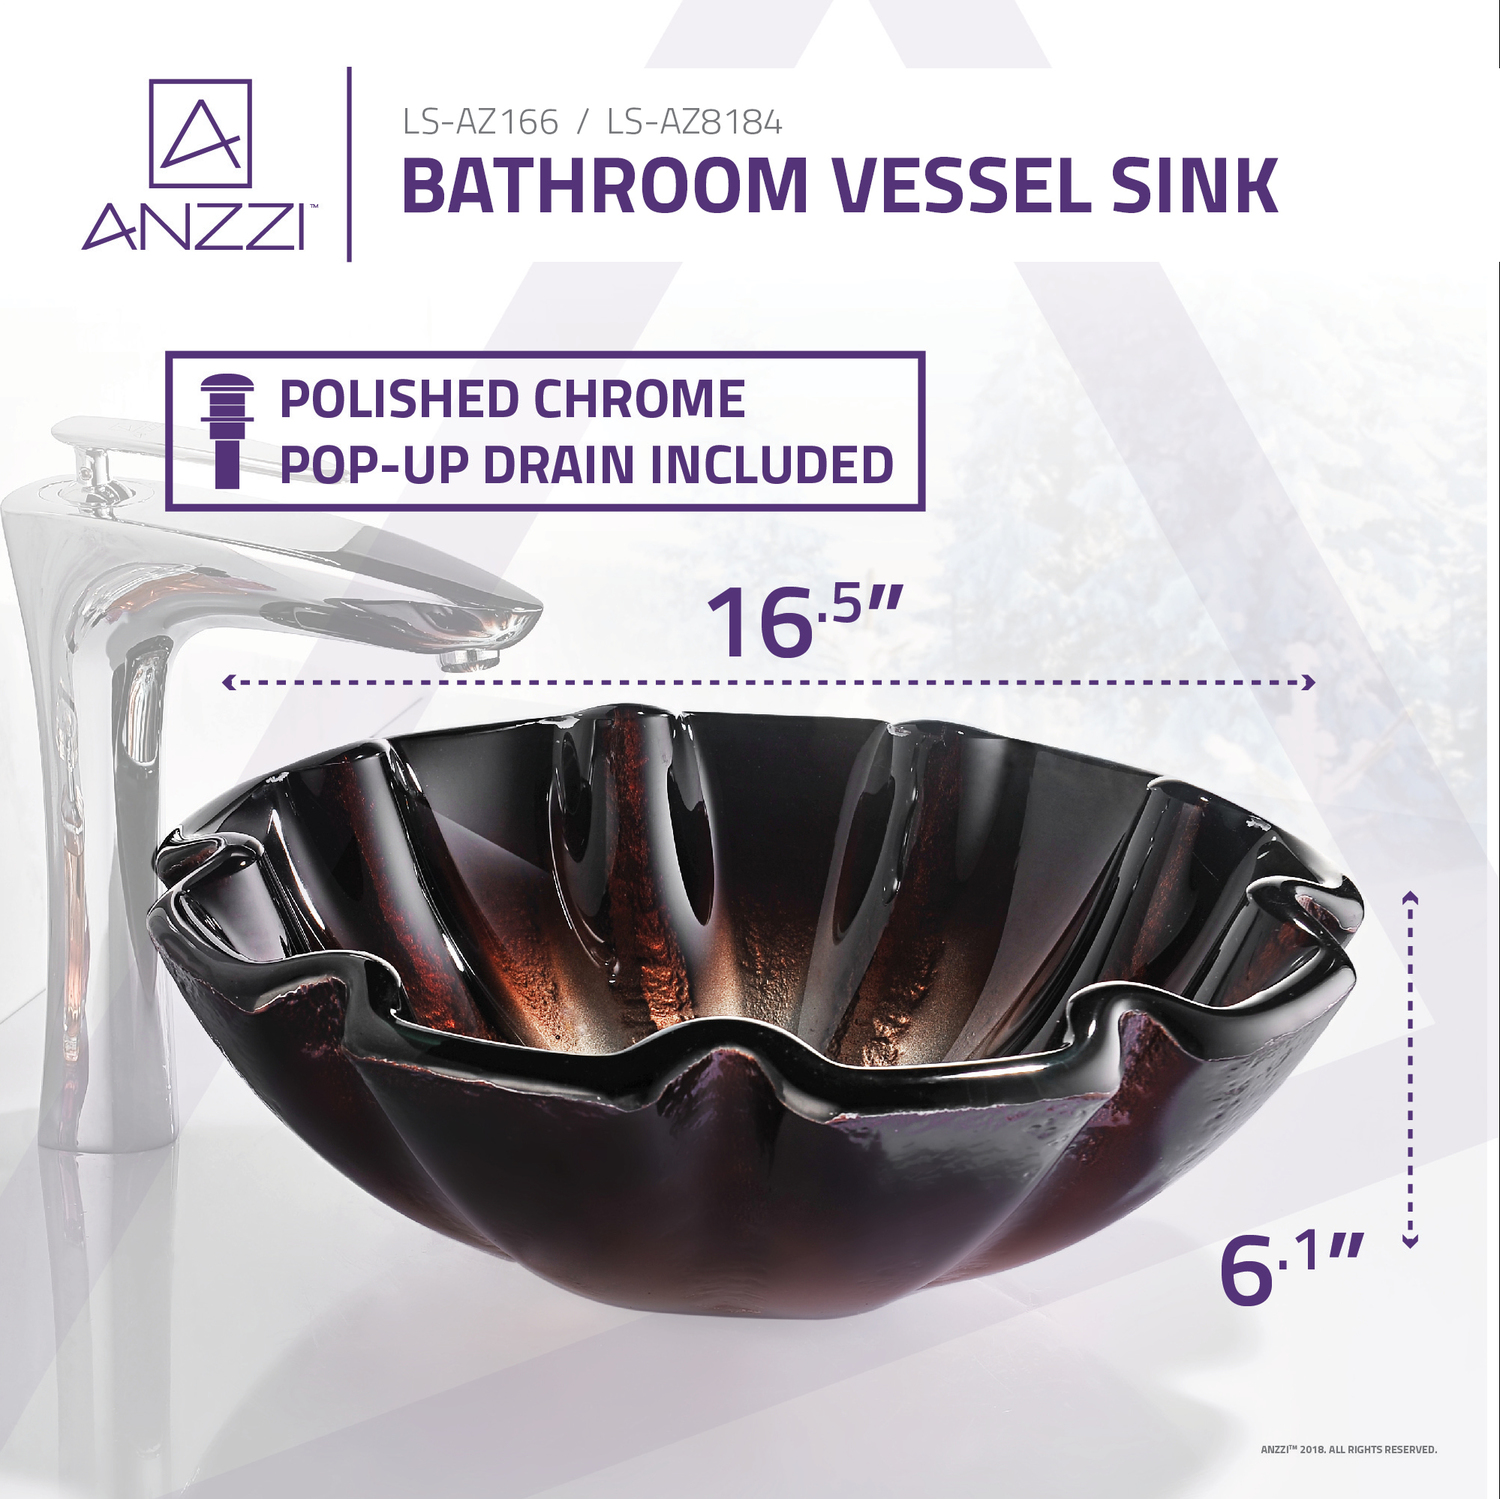 vanity without countertop Anzzi BATHROOM - Sinks - Vessel - Tempered Glass Multi-Colored